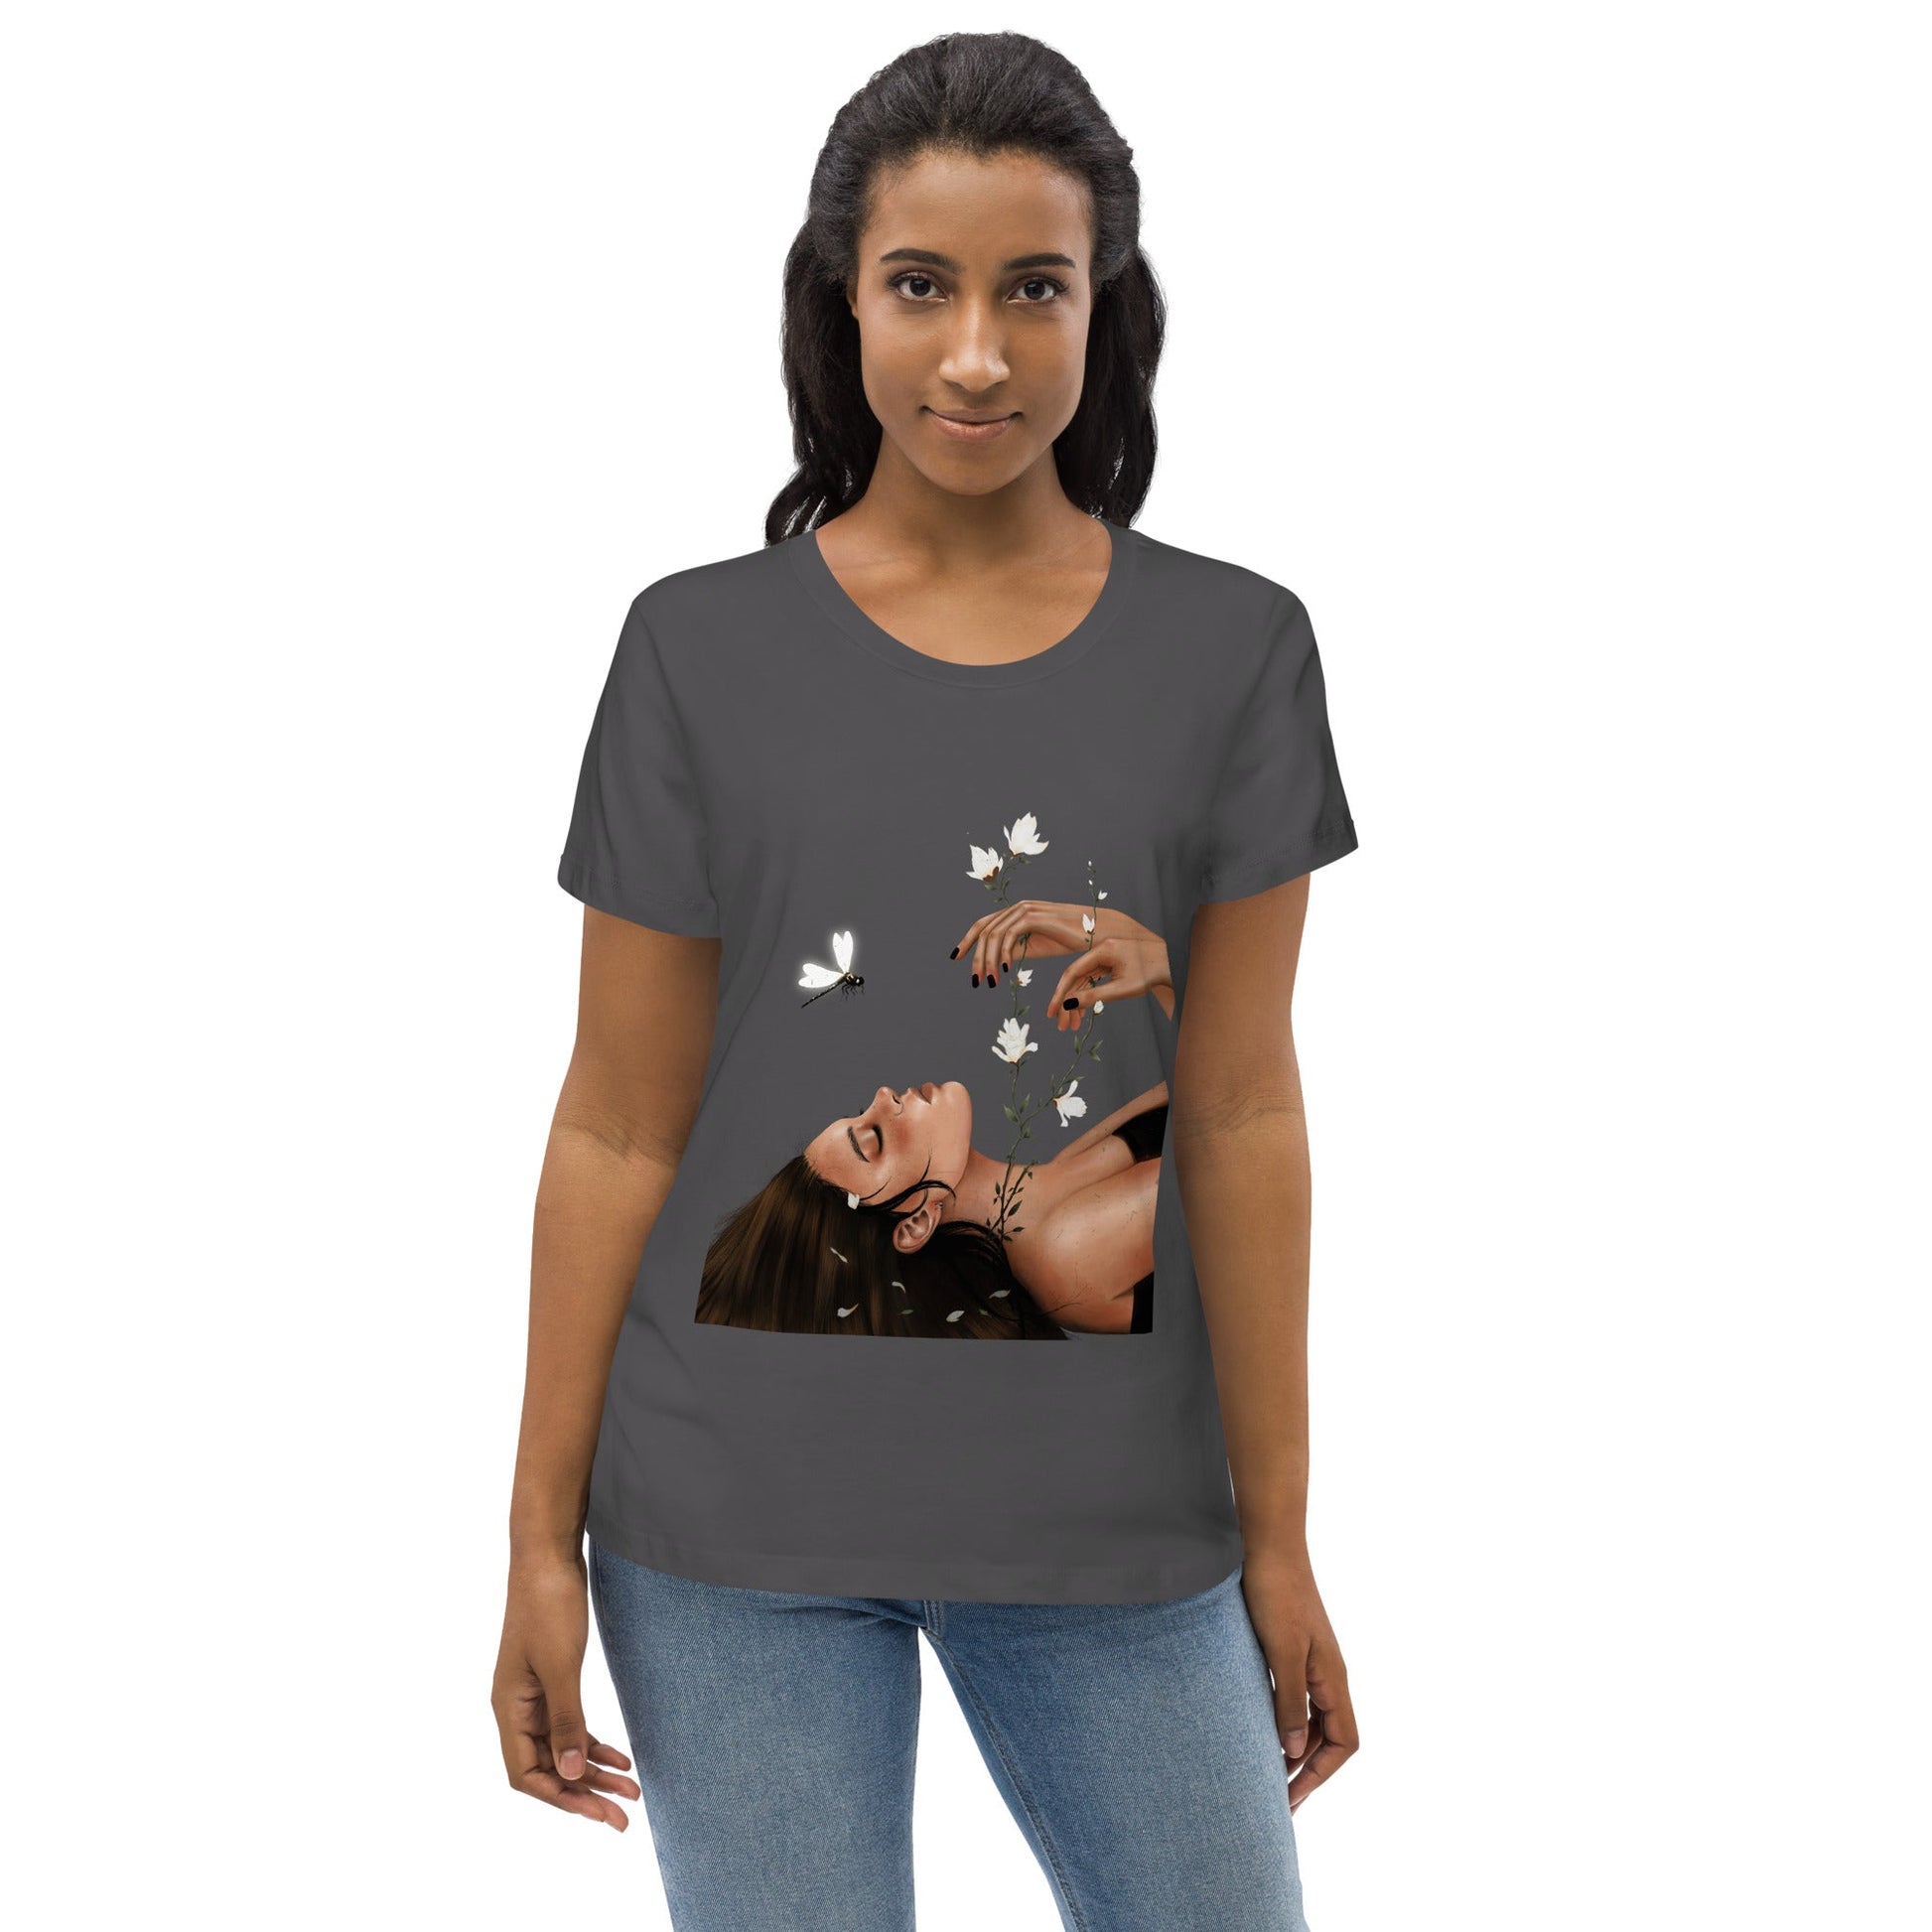 Women's Fitted Eco Tee - NATURE'S LULLABY - Bonotee